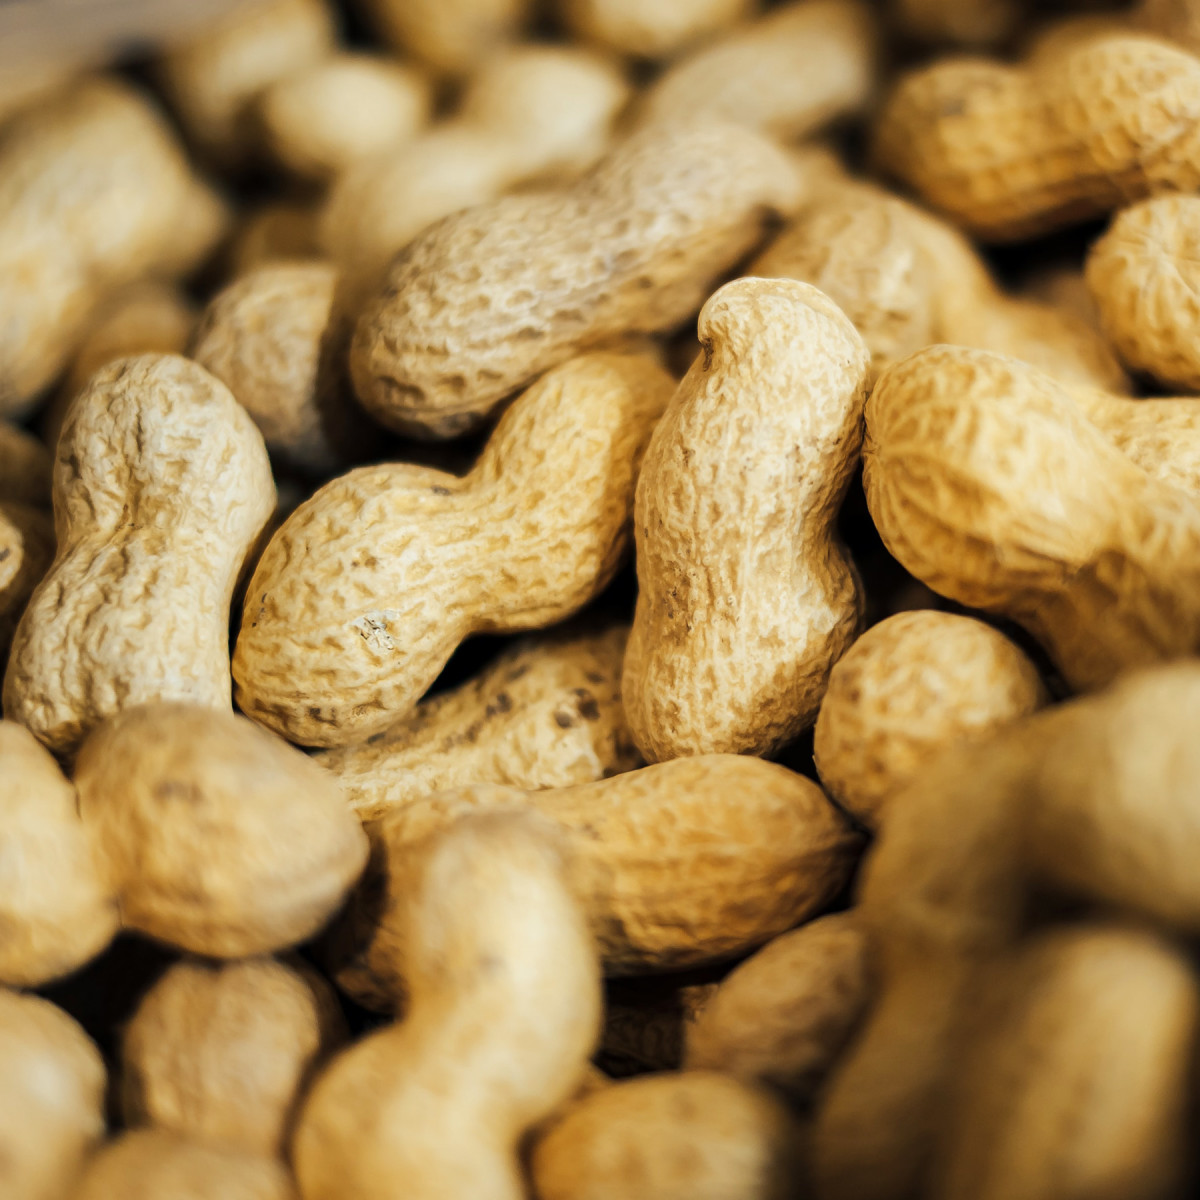 Peanuts are one of my favorite snacks.